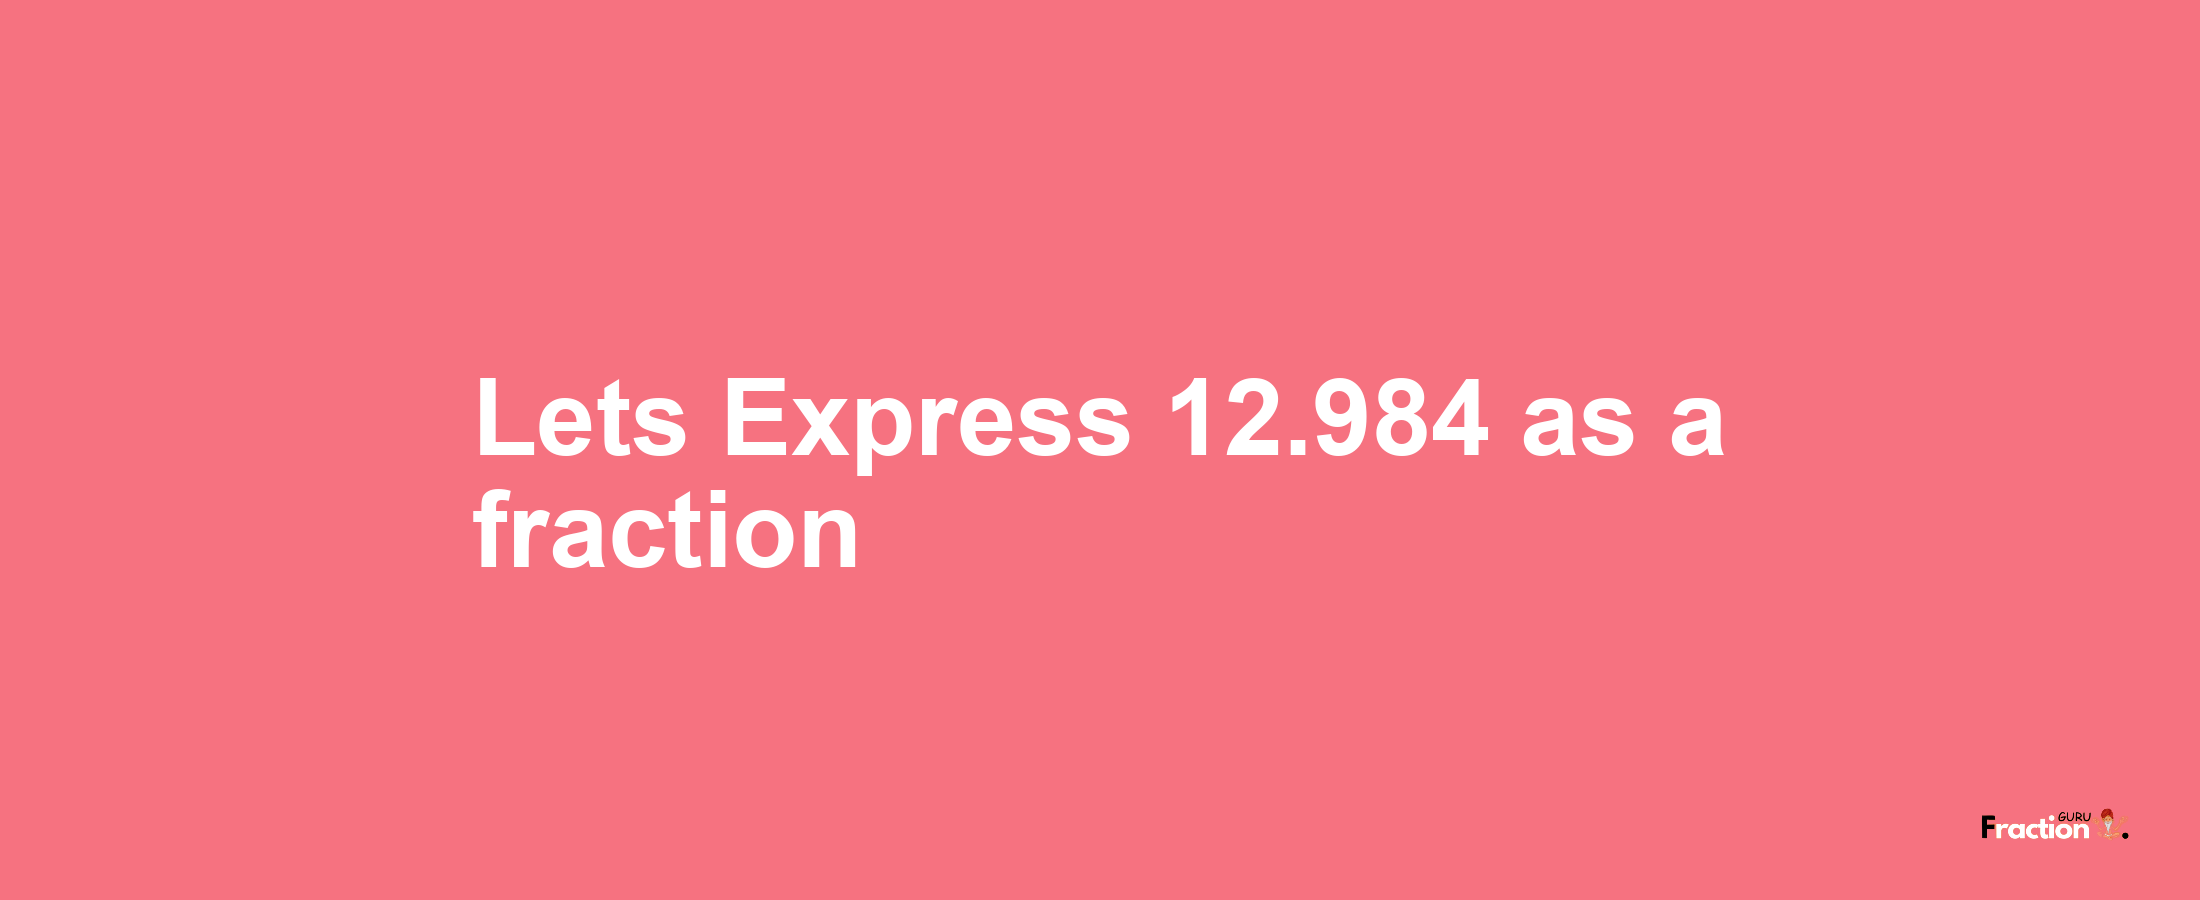 Lets Express 12.984 as afraction